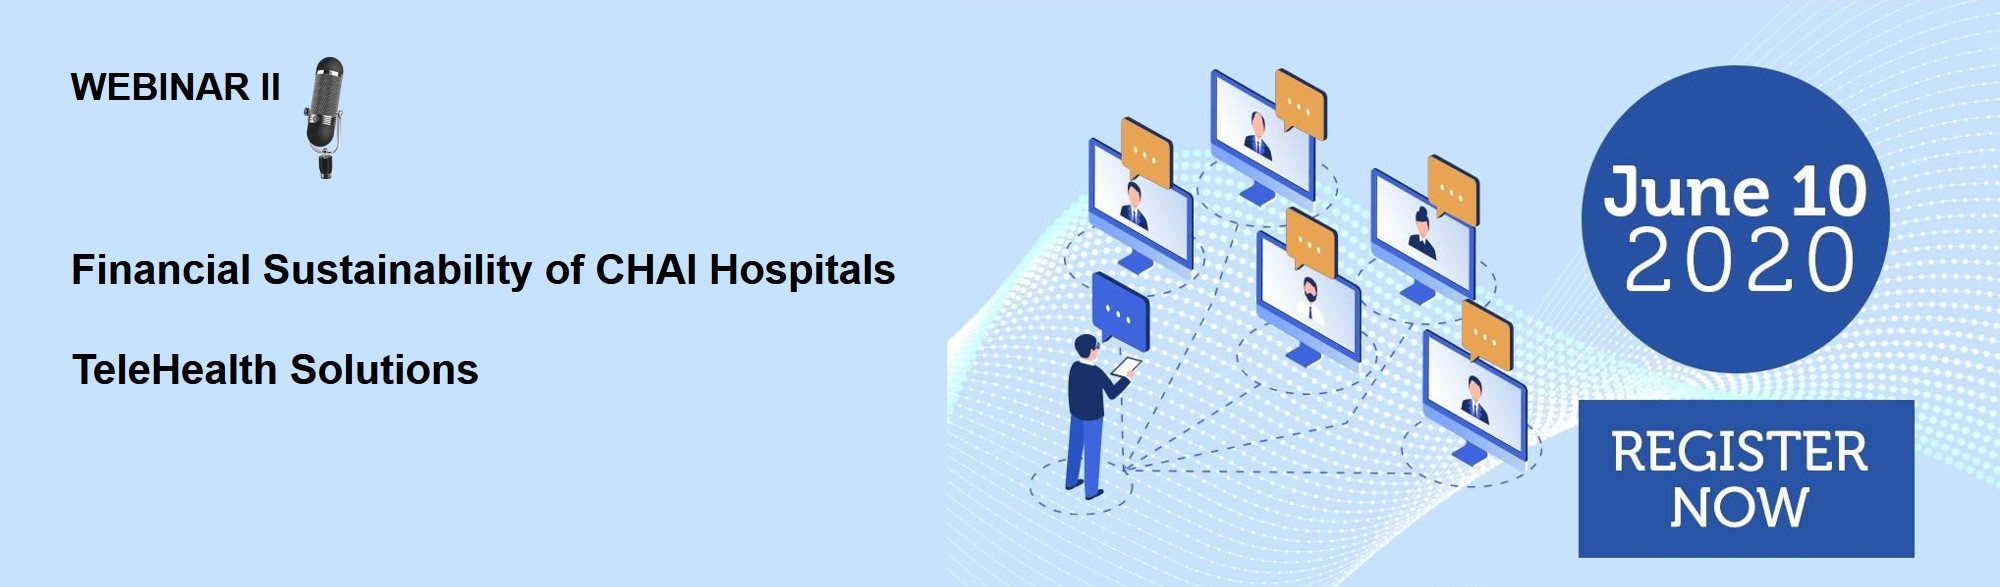 Financial sustainability of CHAI hospitals: TeleHealth solutions